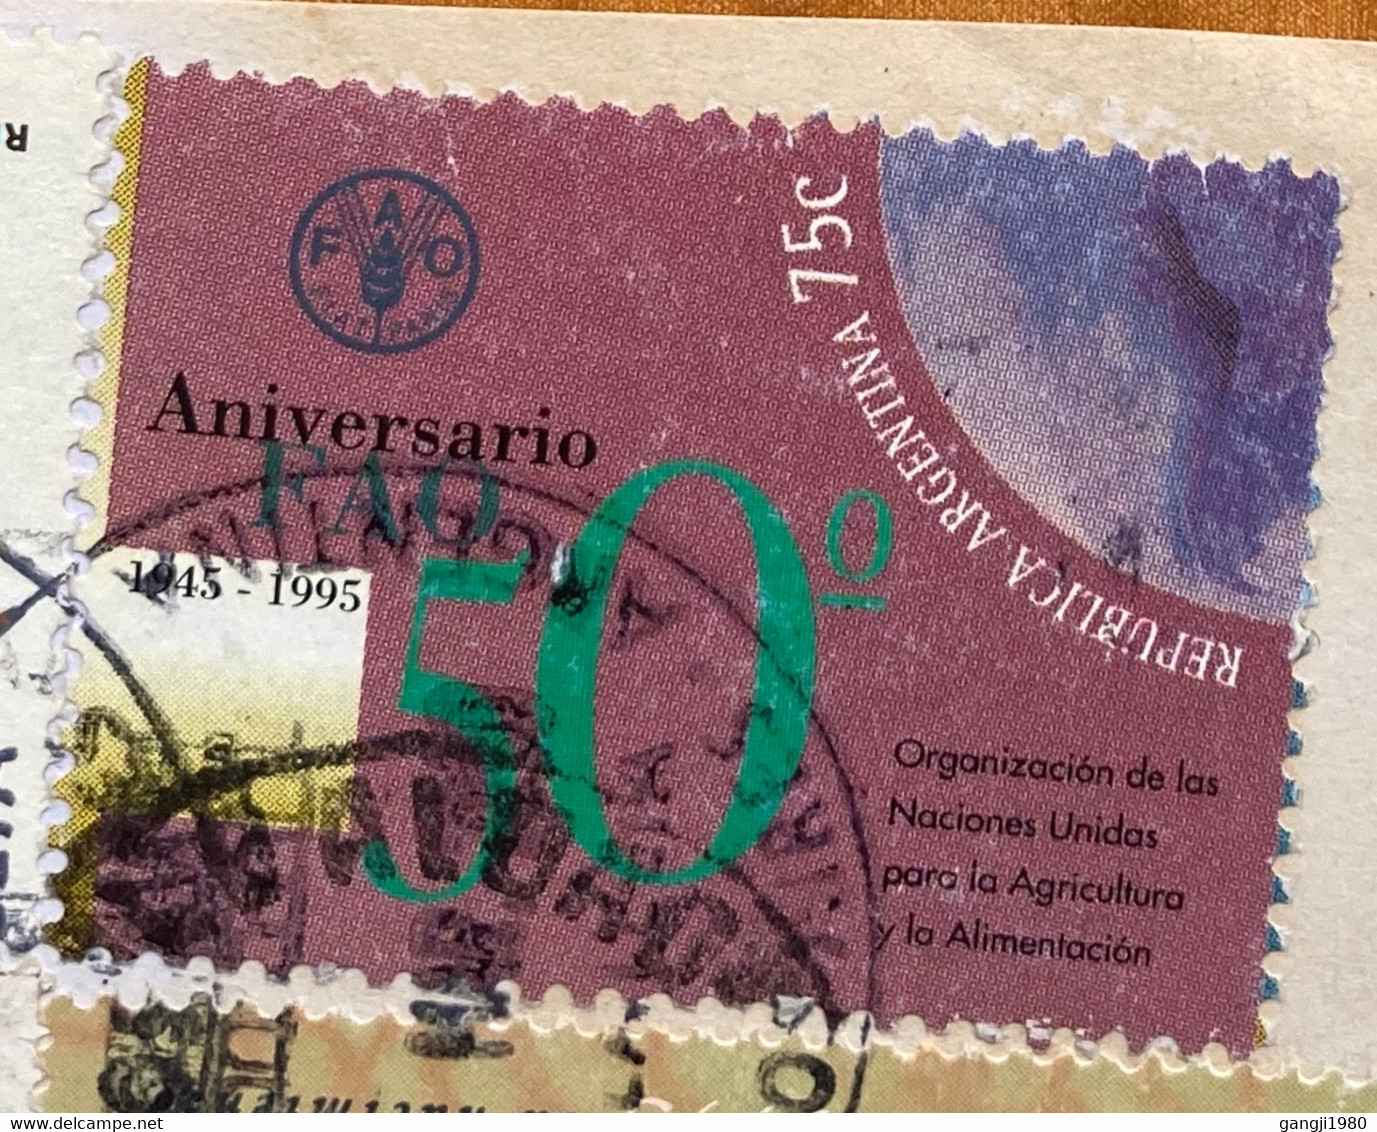 ARGENTINA 2000, JUAN PERON, OWL BIRD TAB, 3 STAMPS SPECIAL BUILDING CANCELLATION,AIRMAIL COVER TO INDIA, RECEIVED IN TOR - Briefe U. Dokumente